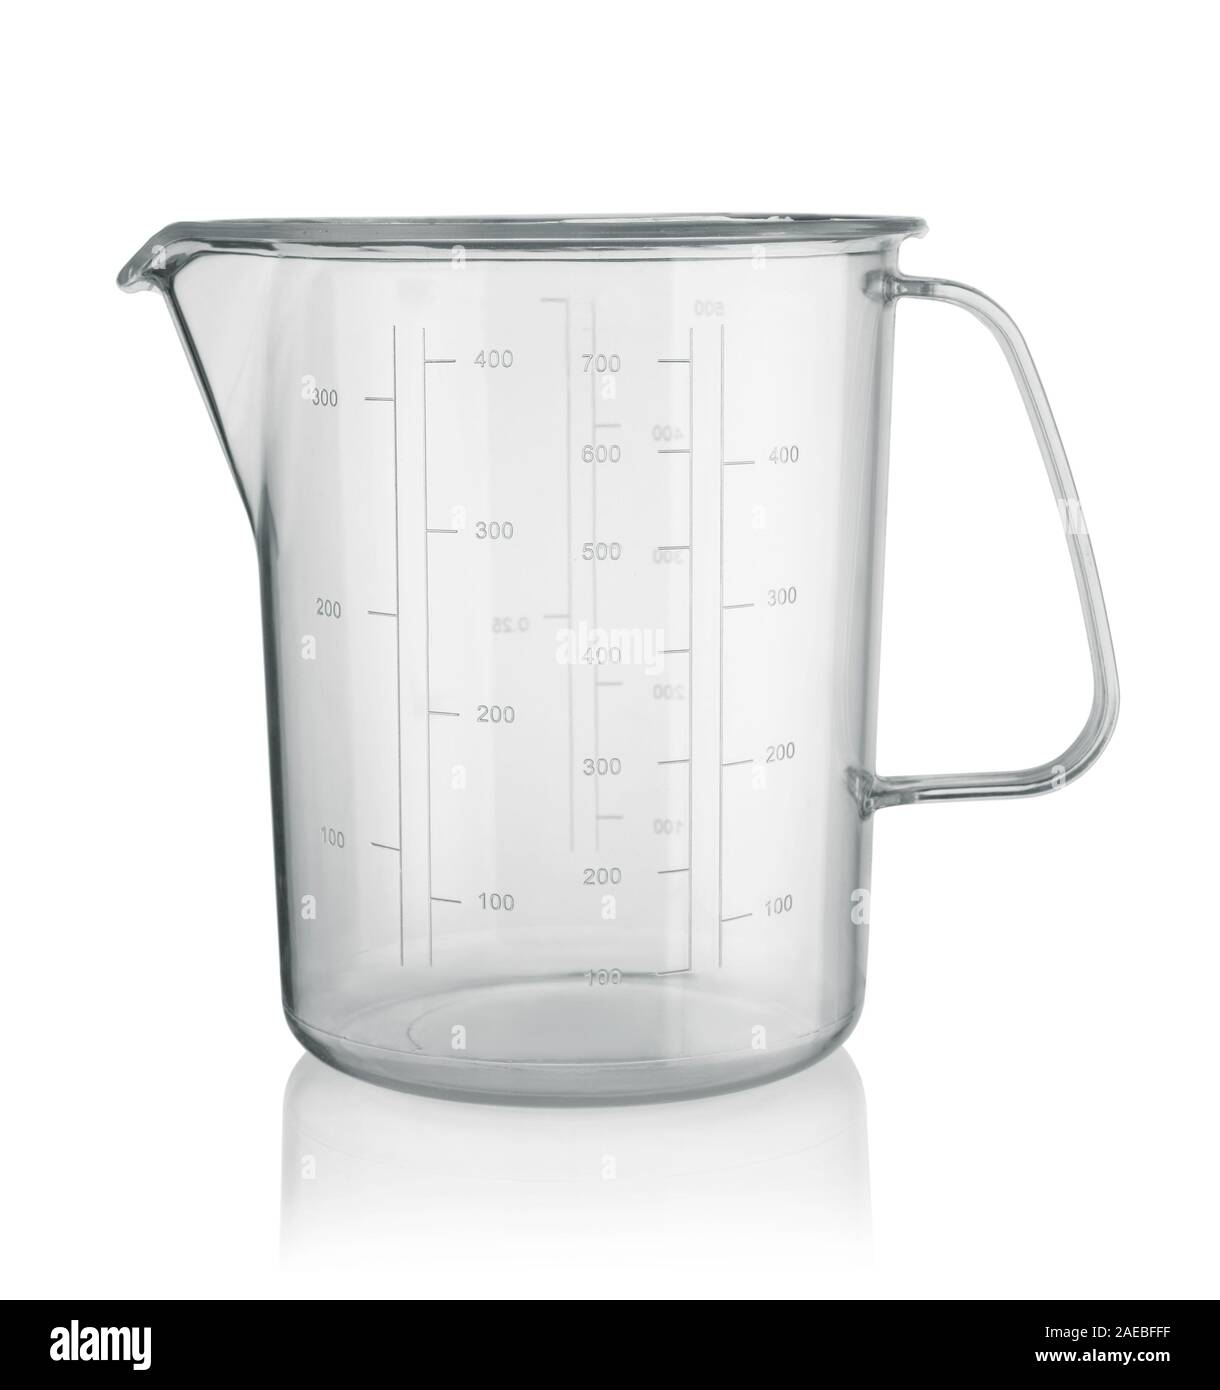 https://c8.alamy.com/comp/2AEBFFF/plastic-measuring-cup-isolated-on-a-white-background-2AEBFFF.jpg